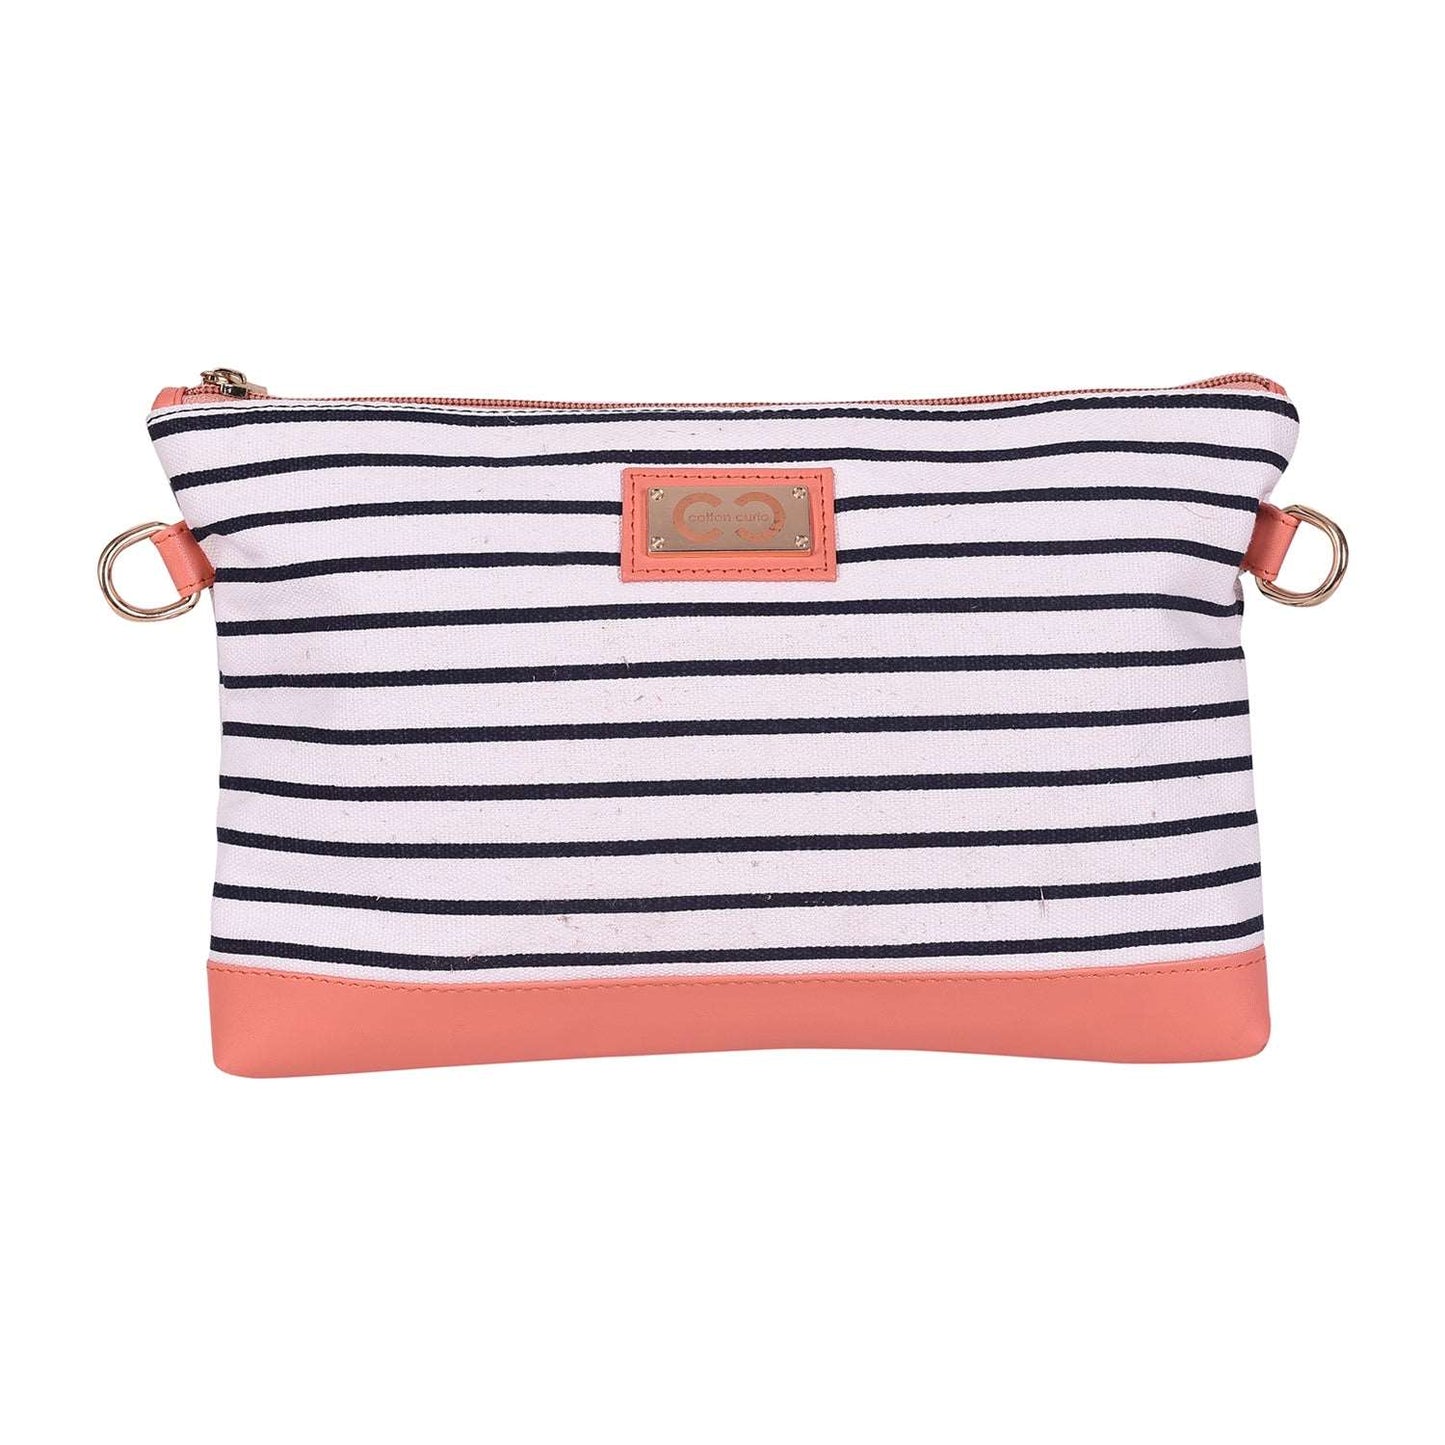 Zag it Sling Bag & Pouch